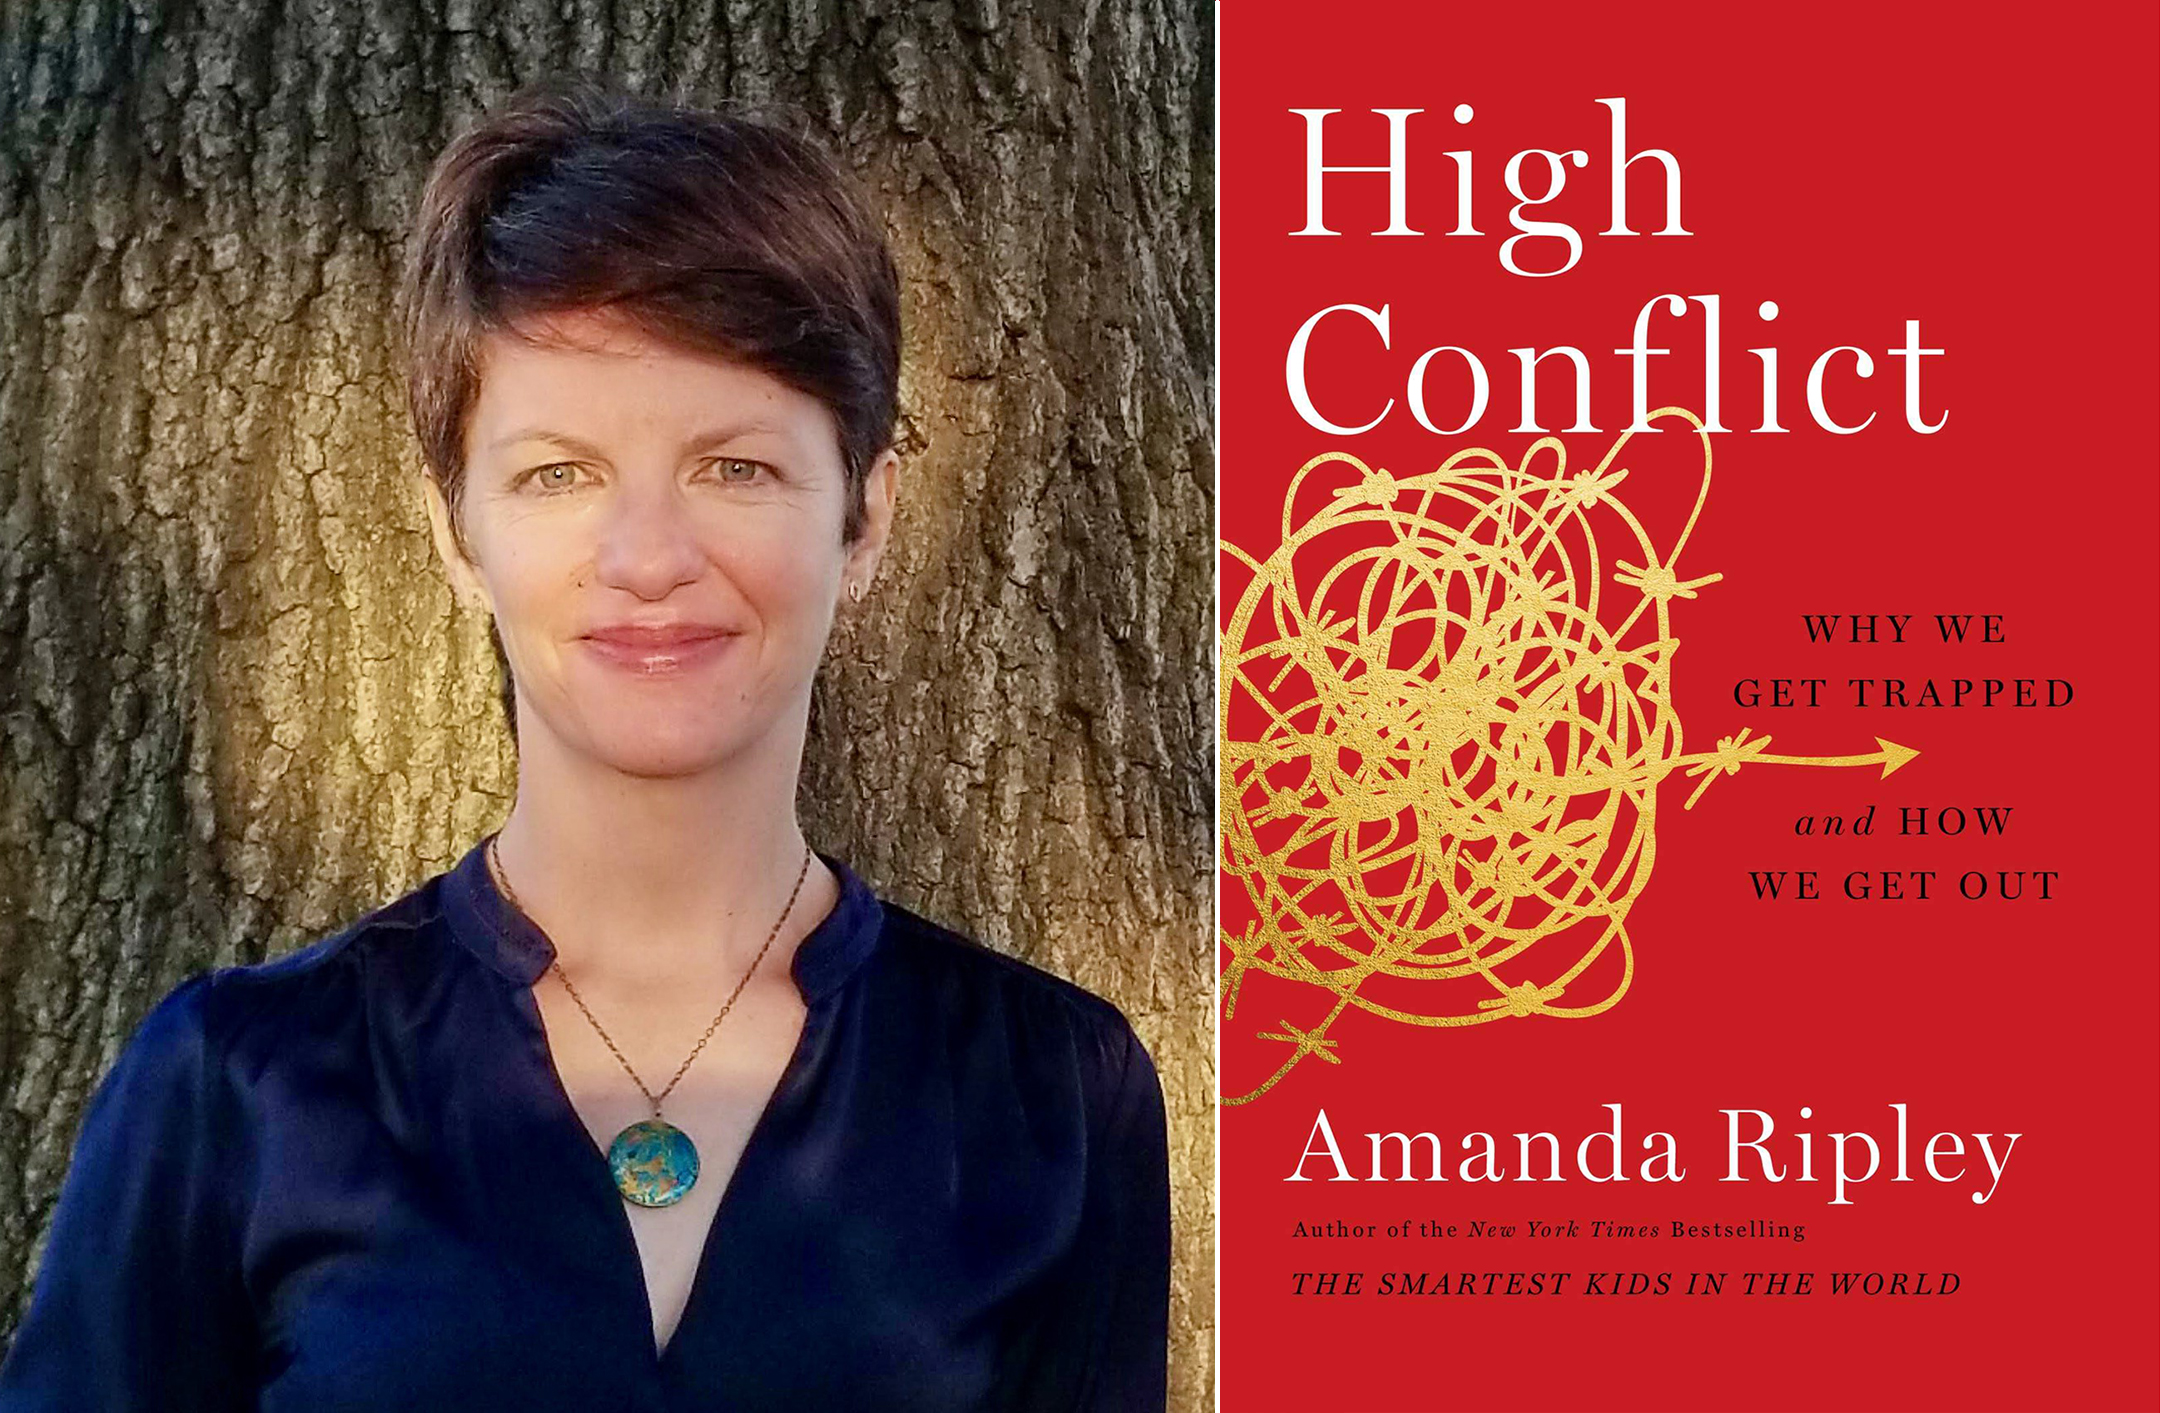 Author photo of Amanda Ripley on the left and the cover of her book High Conflict on the right